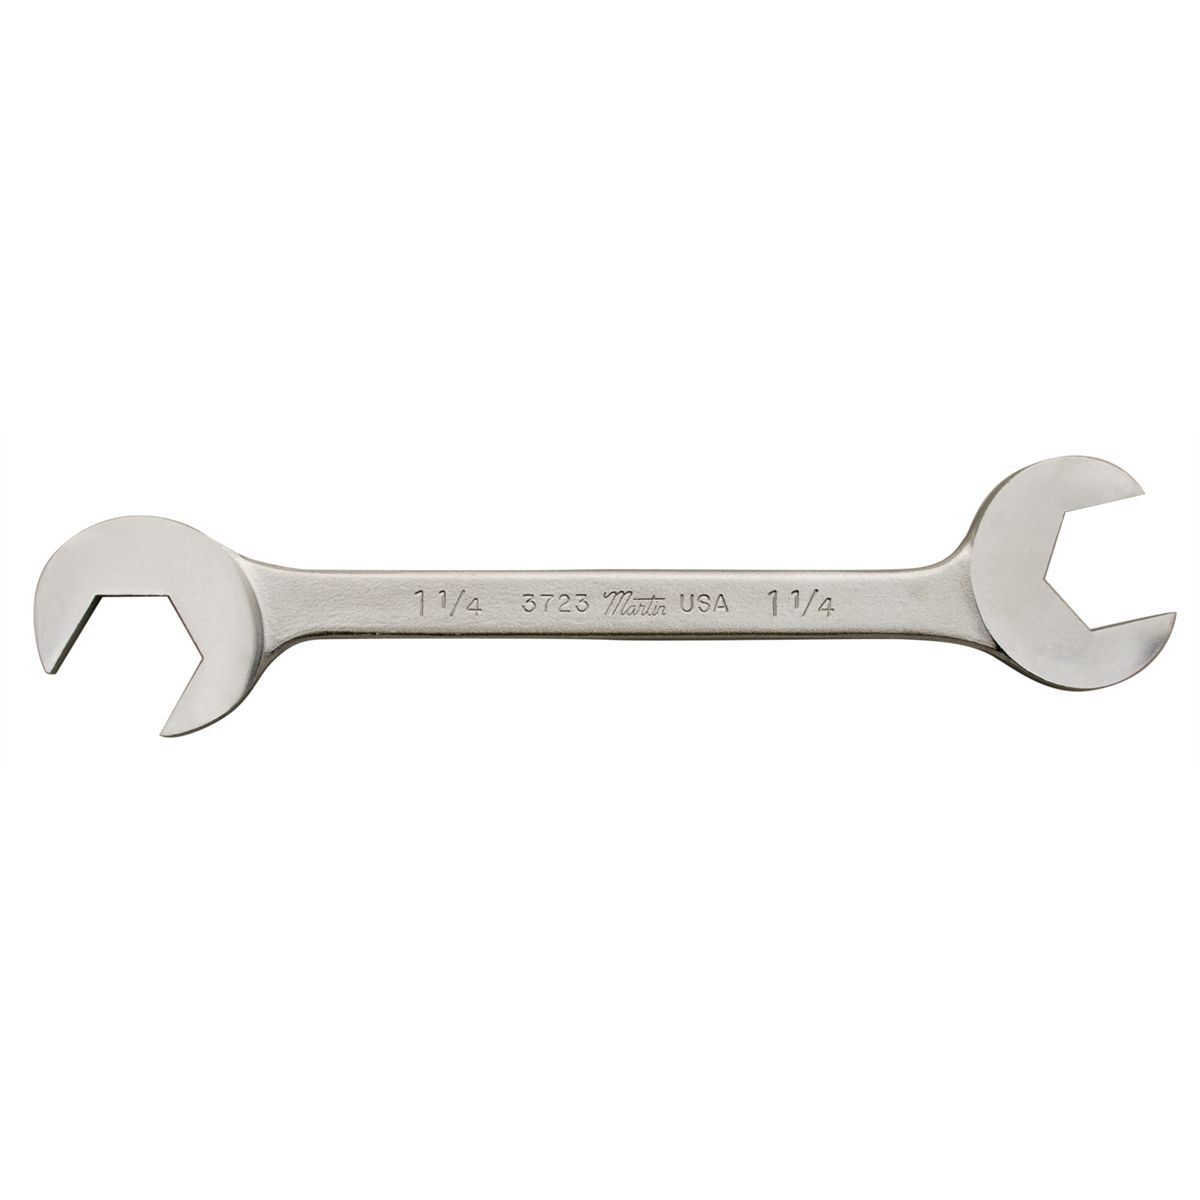 1-1/4 Inch Fractional SAE Angle Wrench-Chrome